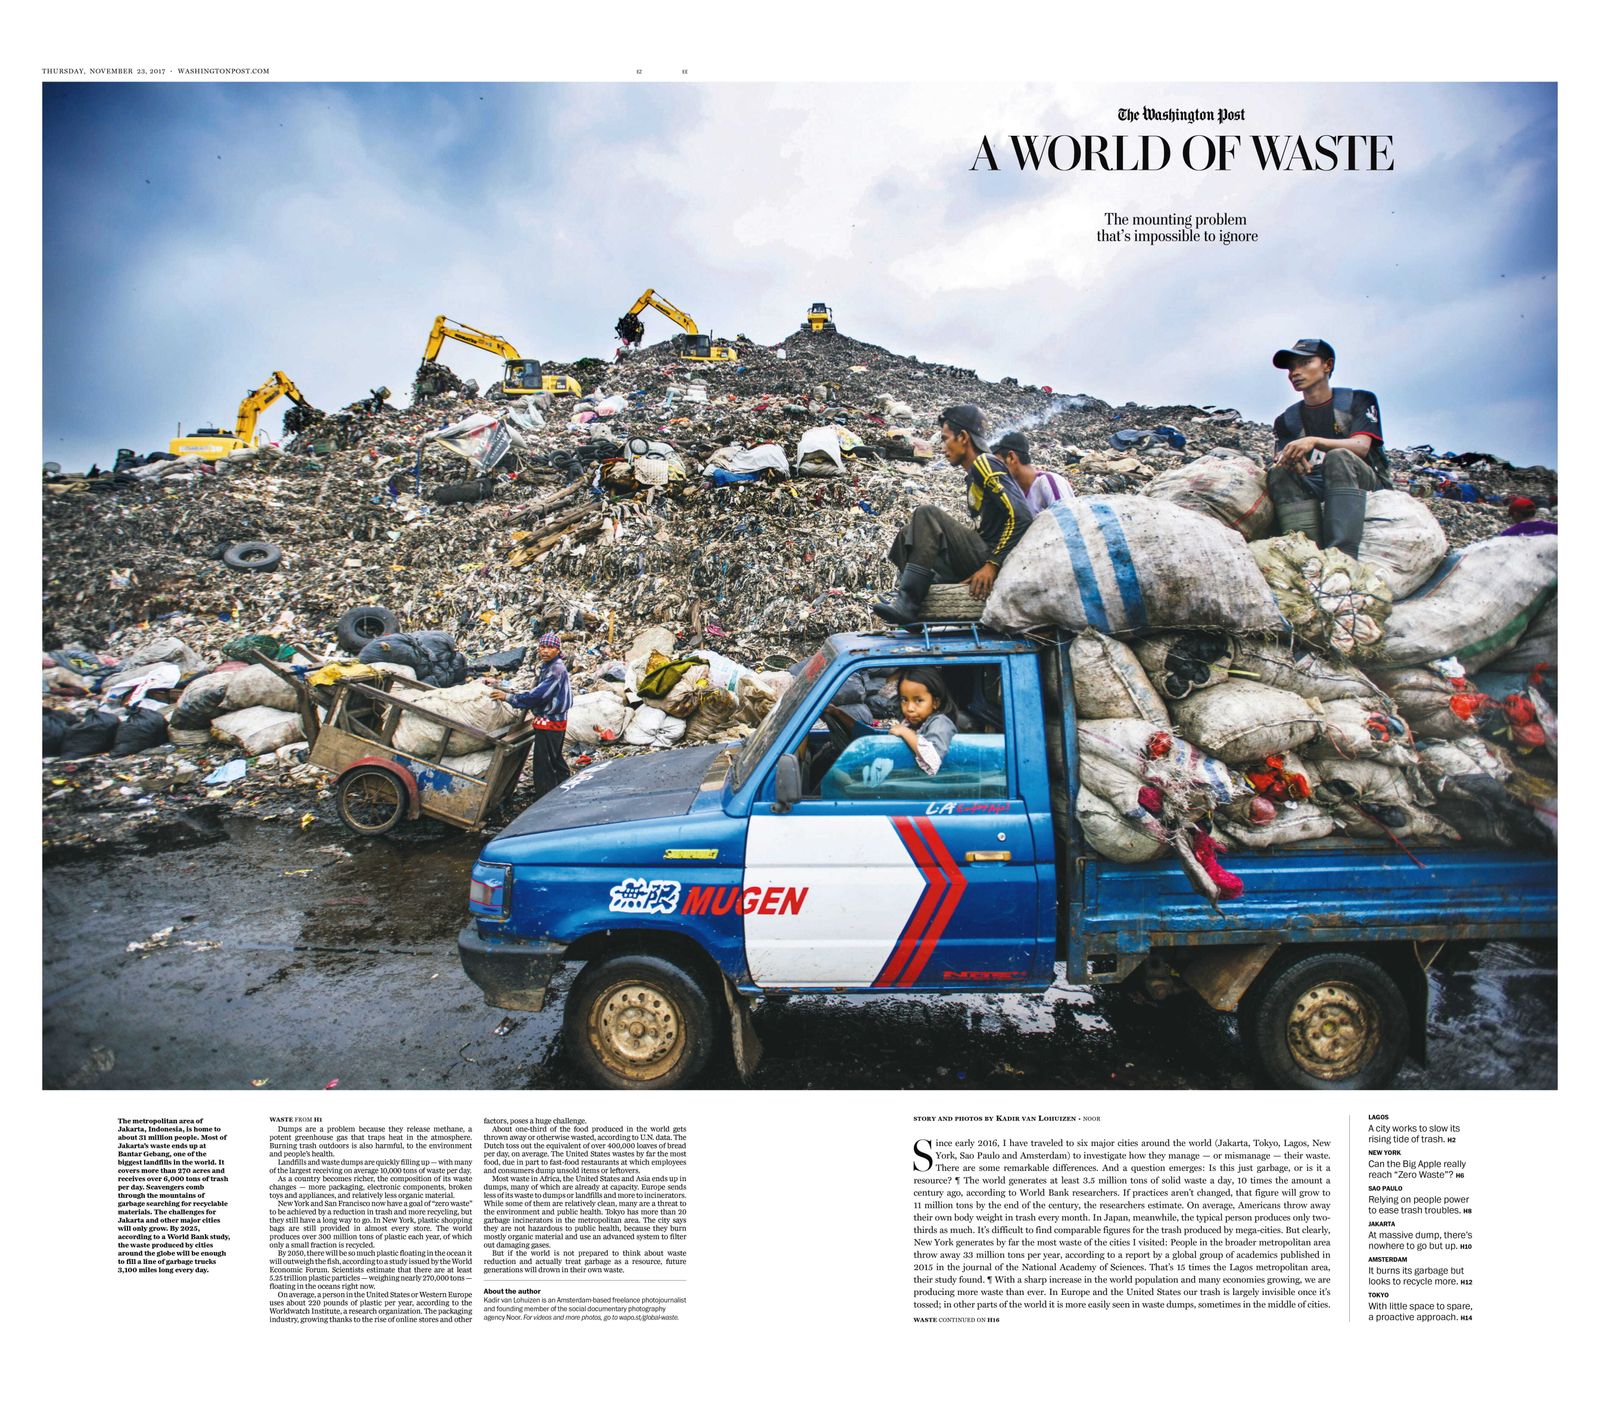 From The Washington Post feature A World of Waste, edited by Nick Kirkpatrick